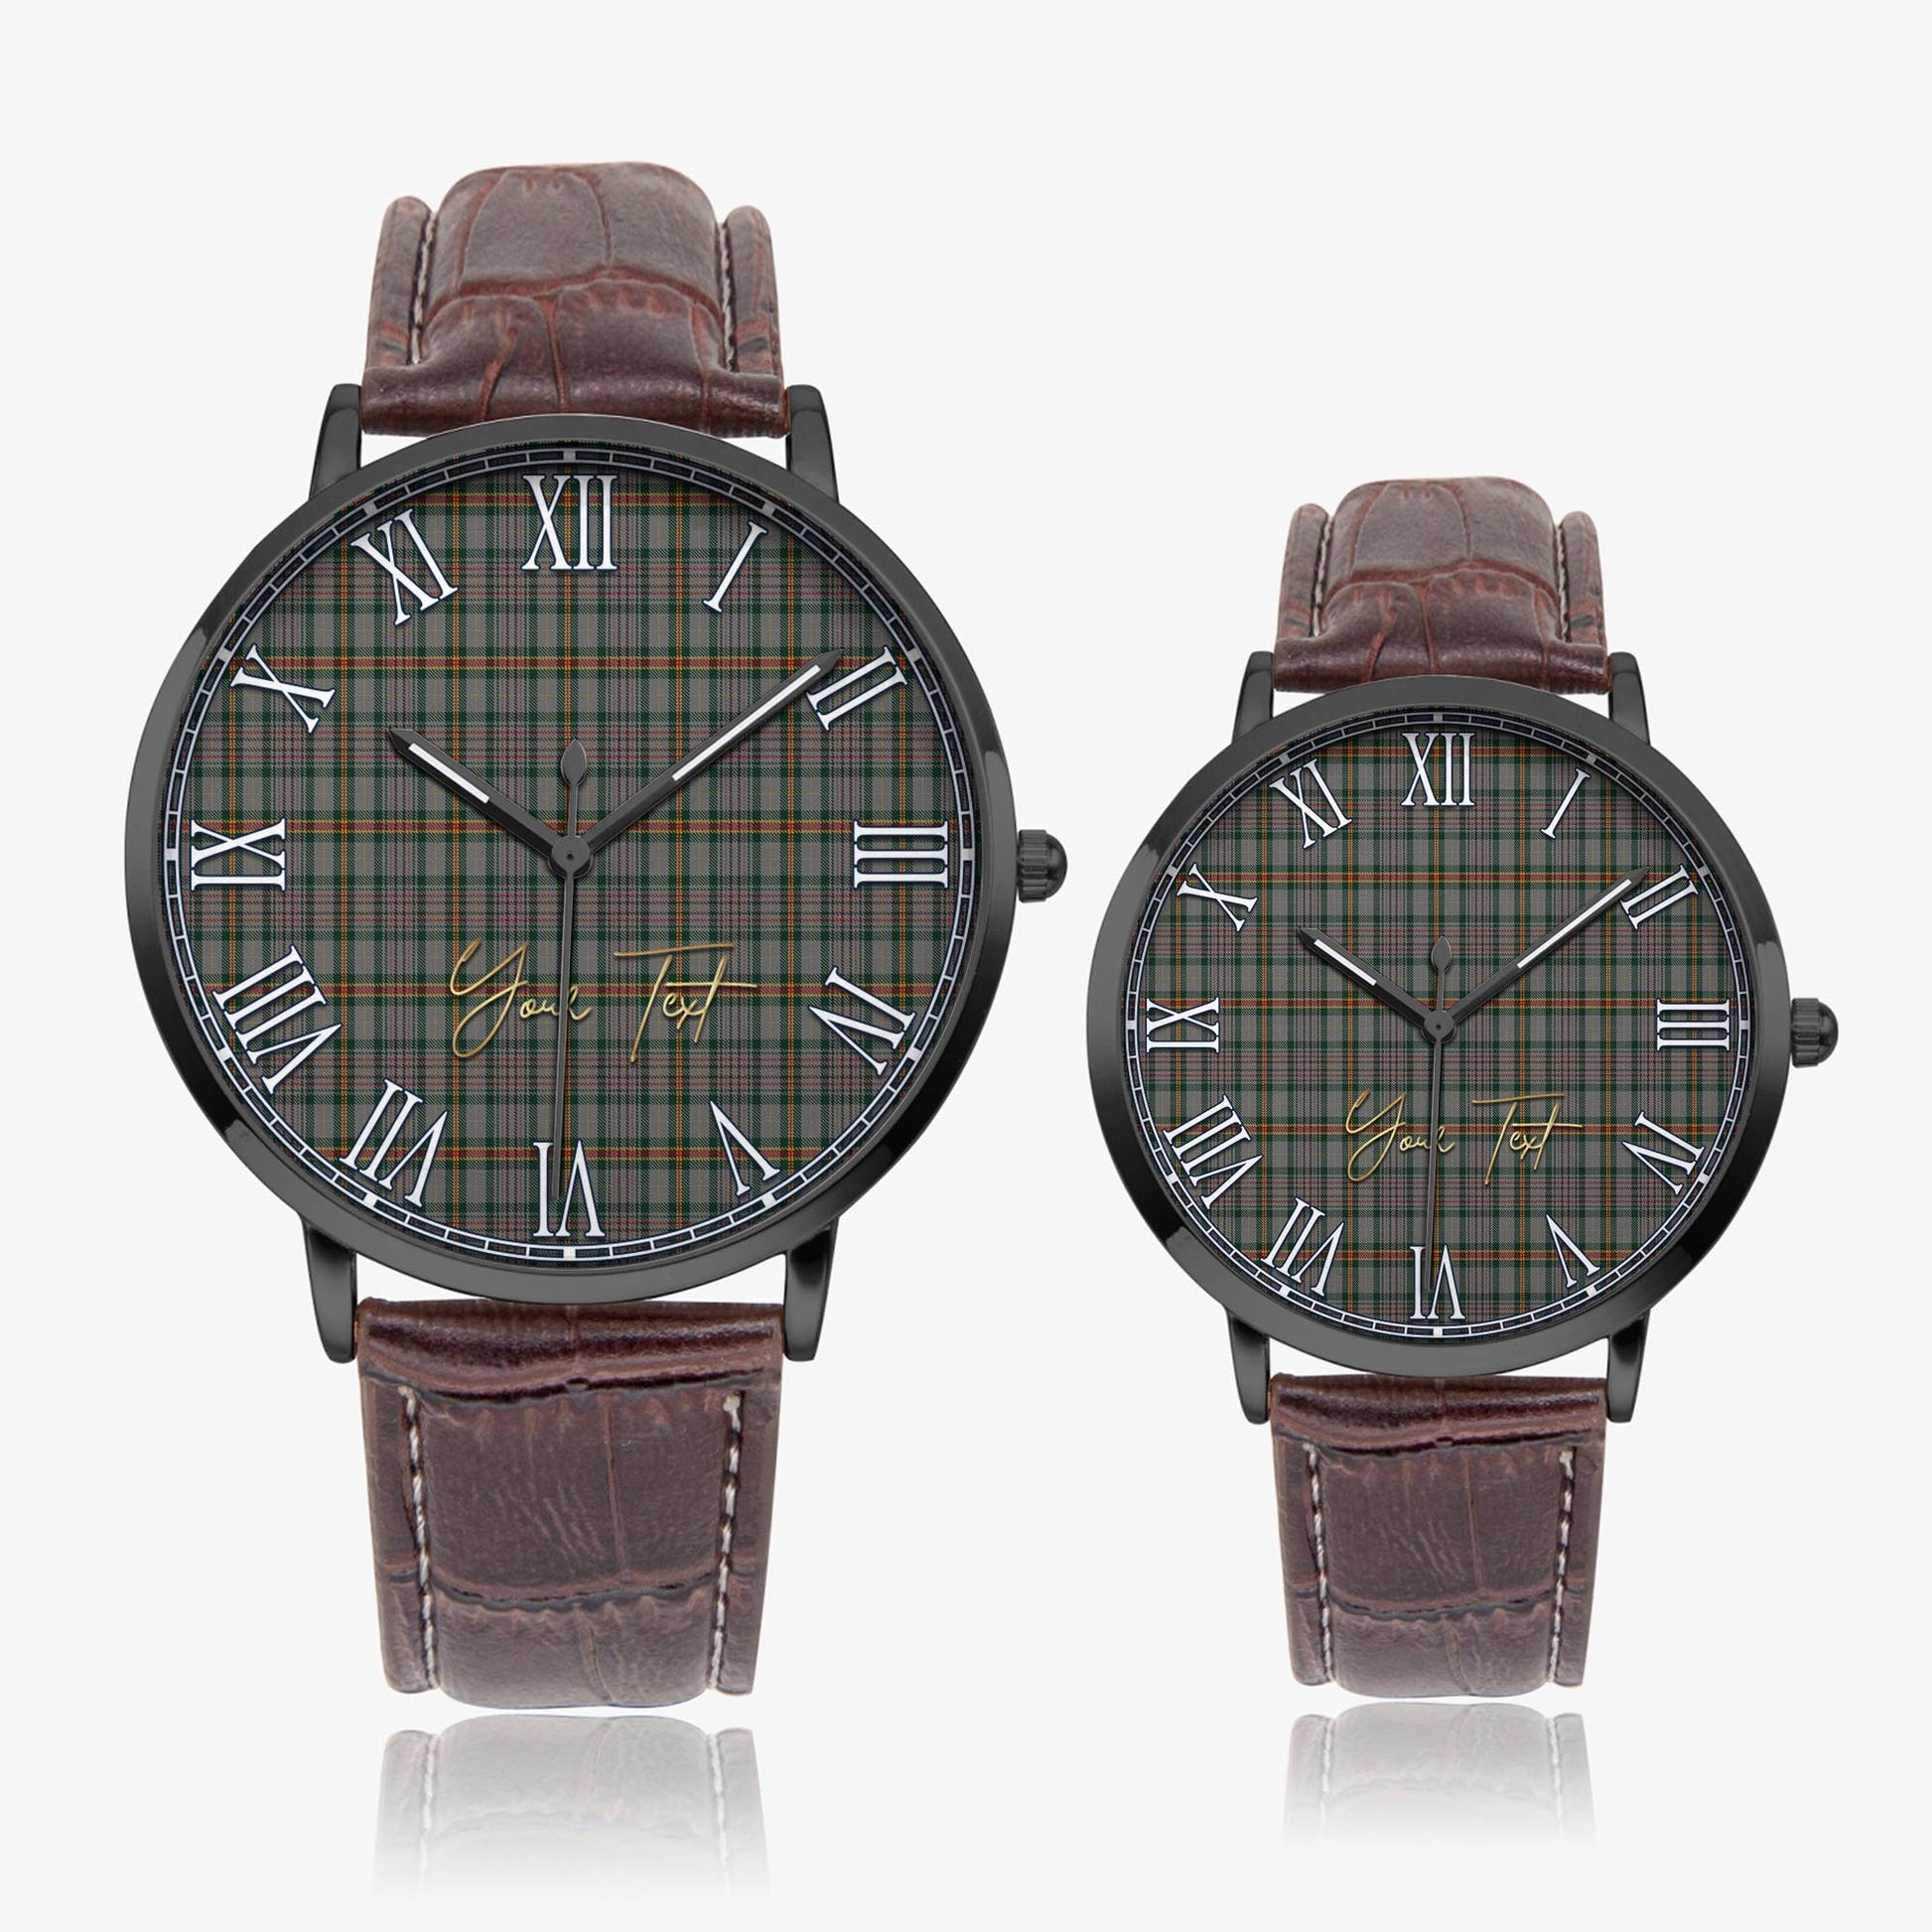 Howell of Wales Tartan Personalized Your Text Leather Trap Quartz Watch Ultra Thin Black Case With Brown Leather Strap - Tartanvibesclothing